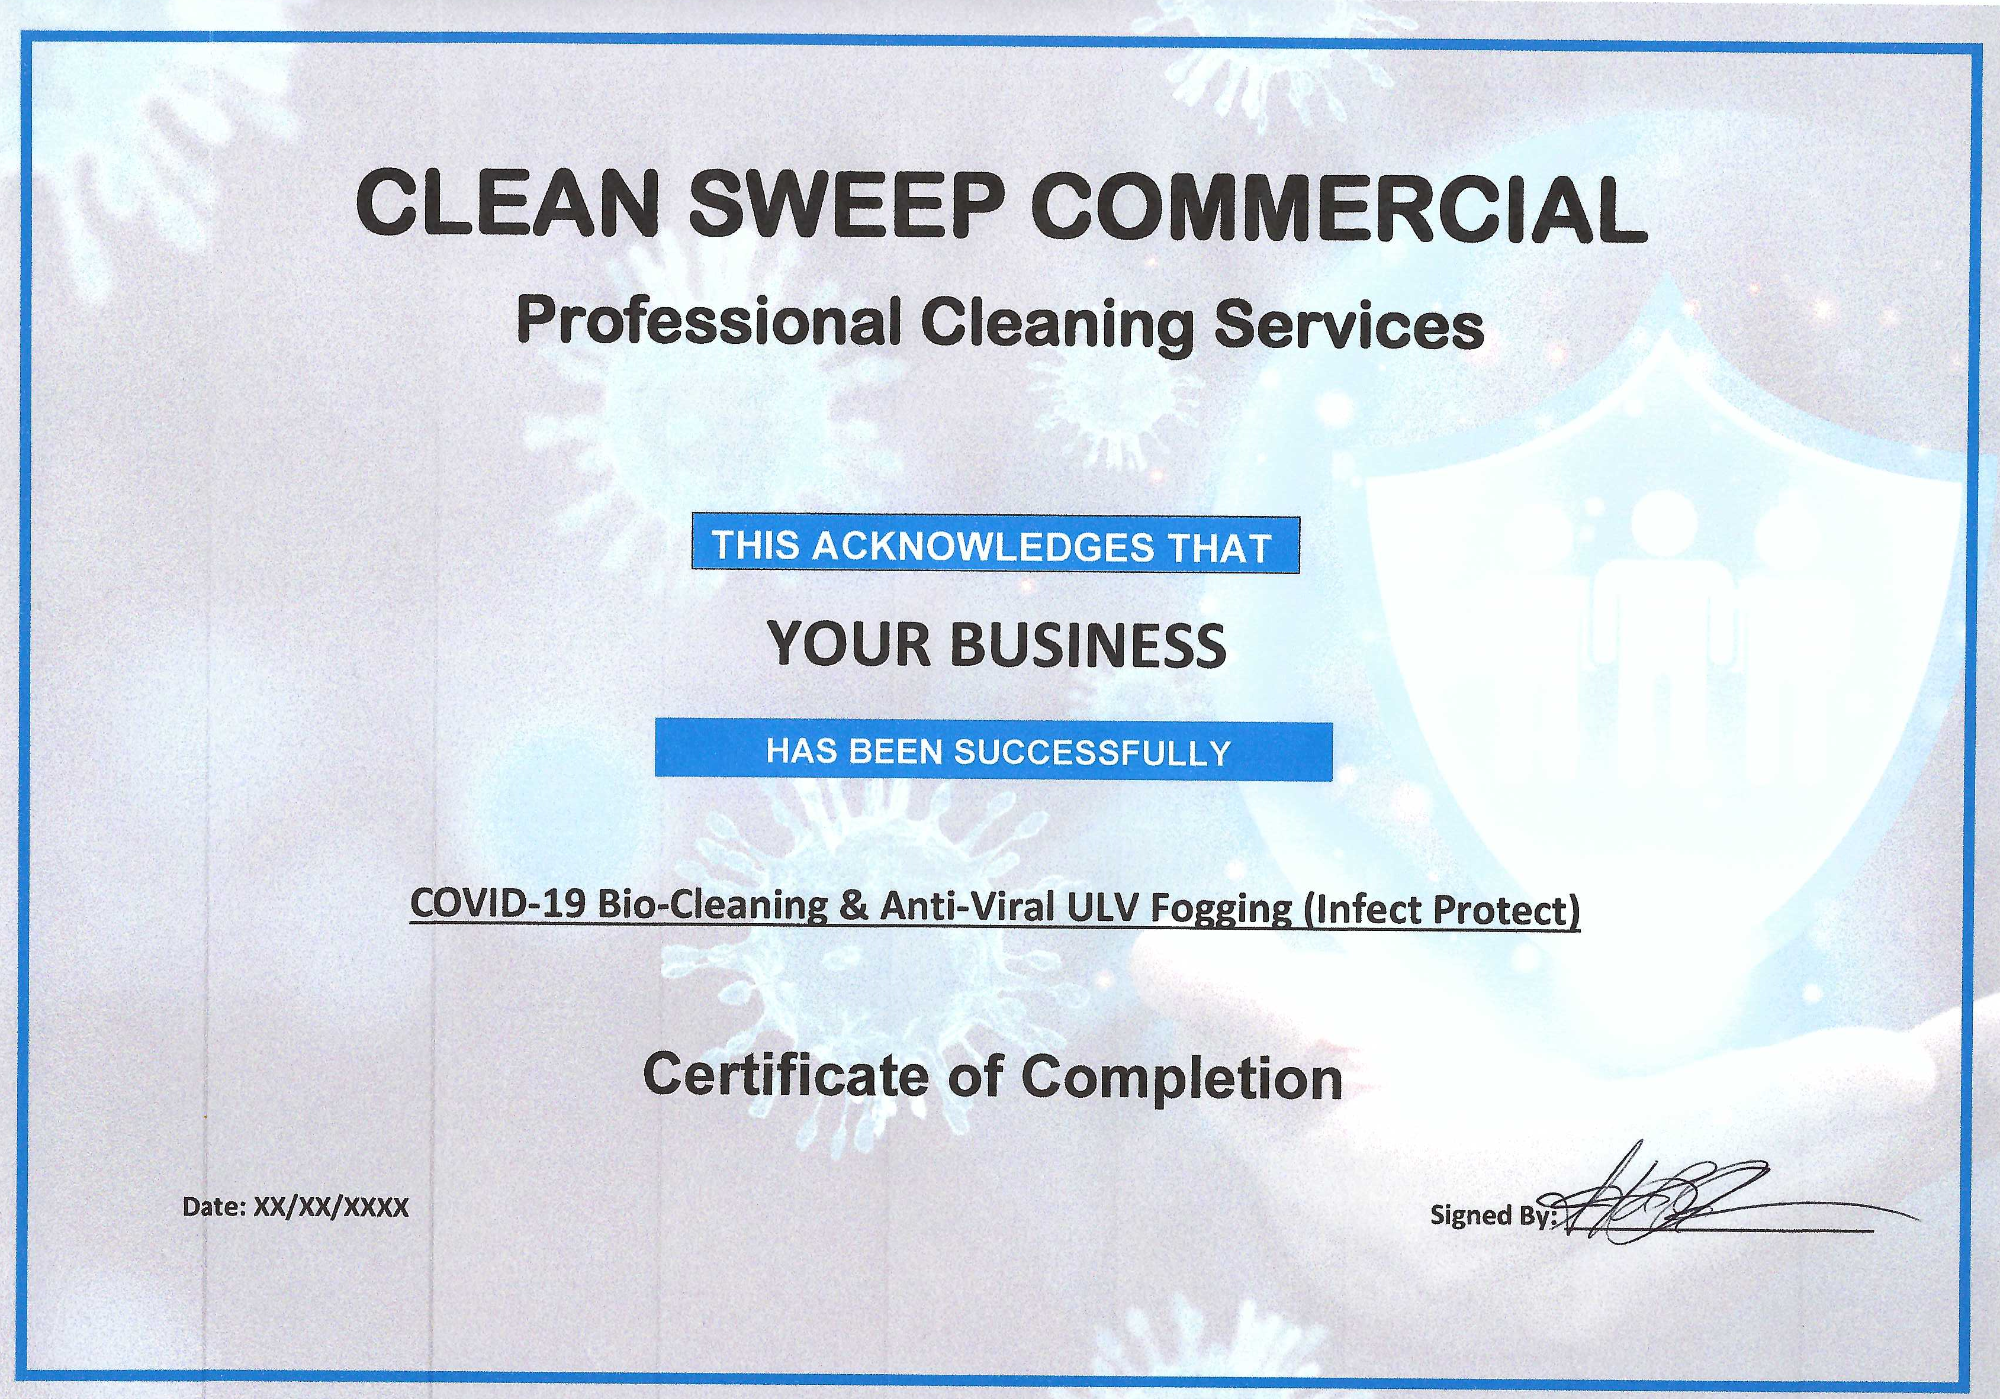 cleansweep-commercial-certificate-completition-lincoln